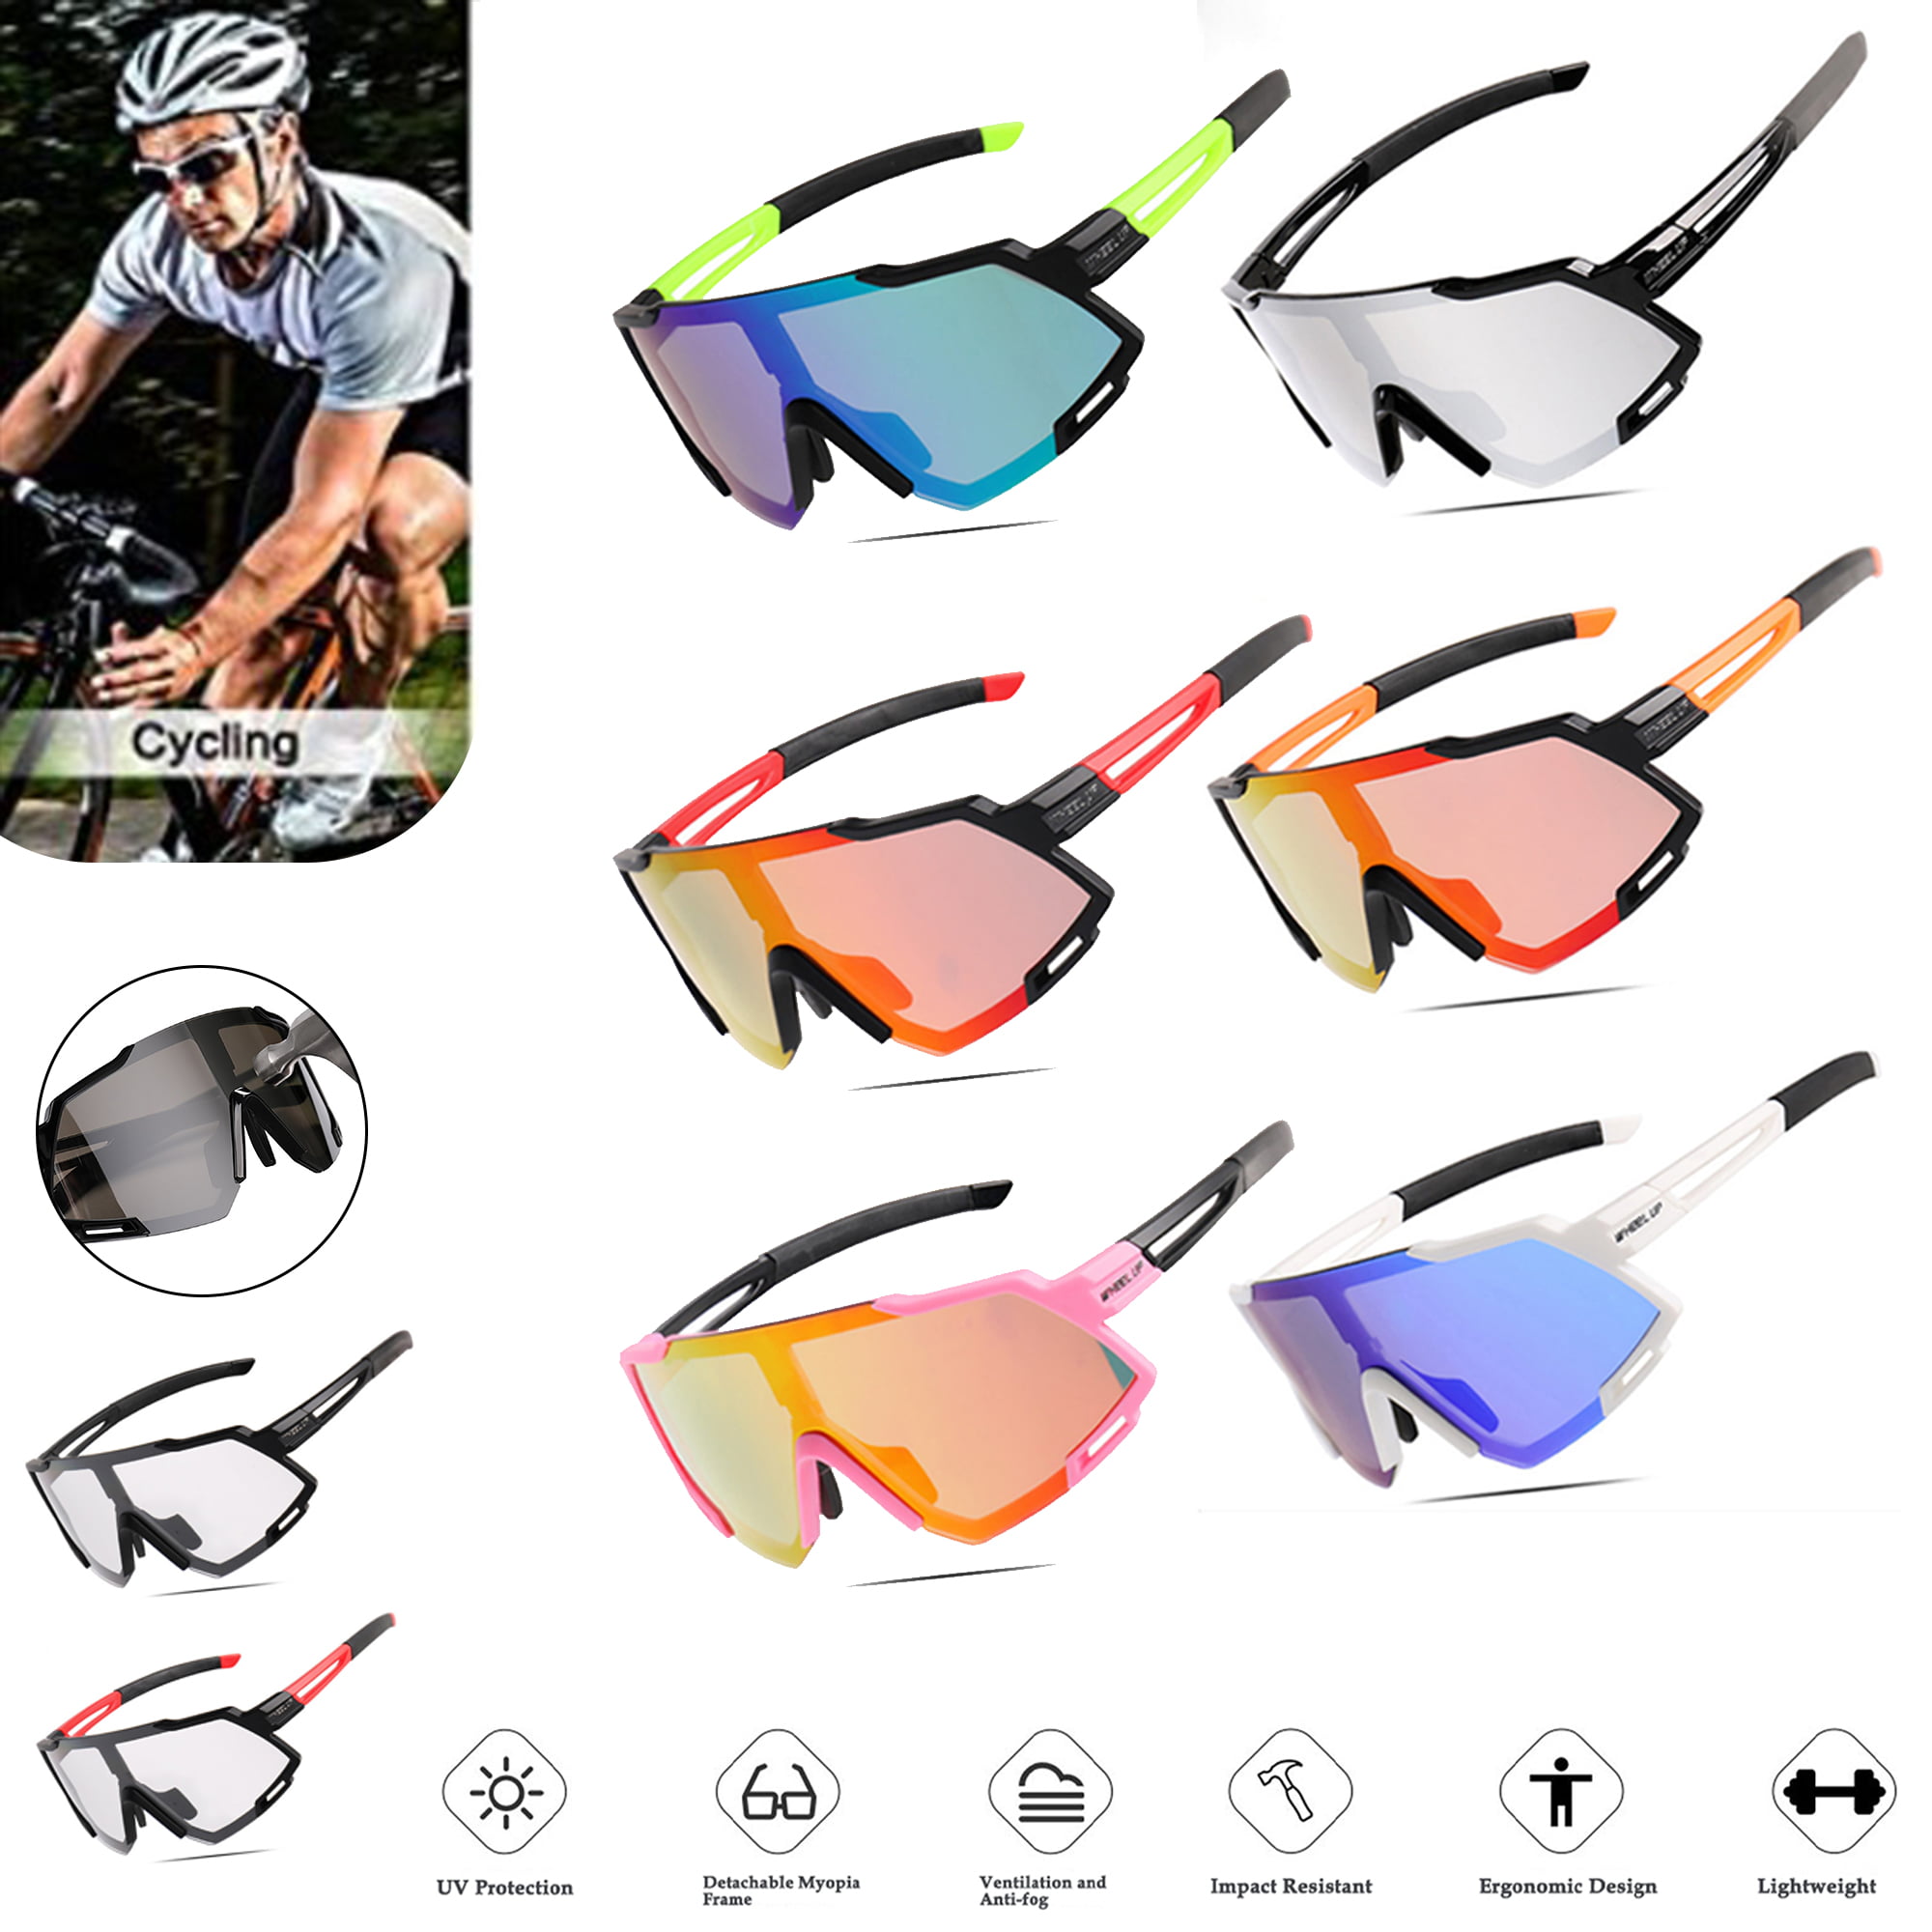 Mens Cycling Glasses Wind Cycling Glasses 13 Cycling Glasses Bike Goggles for women/men Outdoor Sports Sunglasses UV400 Big Lens Spectacles Sunglasses Oculos Ciclismo Cycling Glasses 